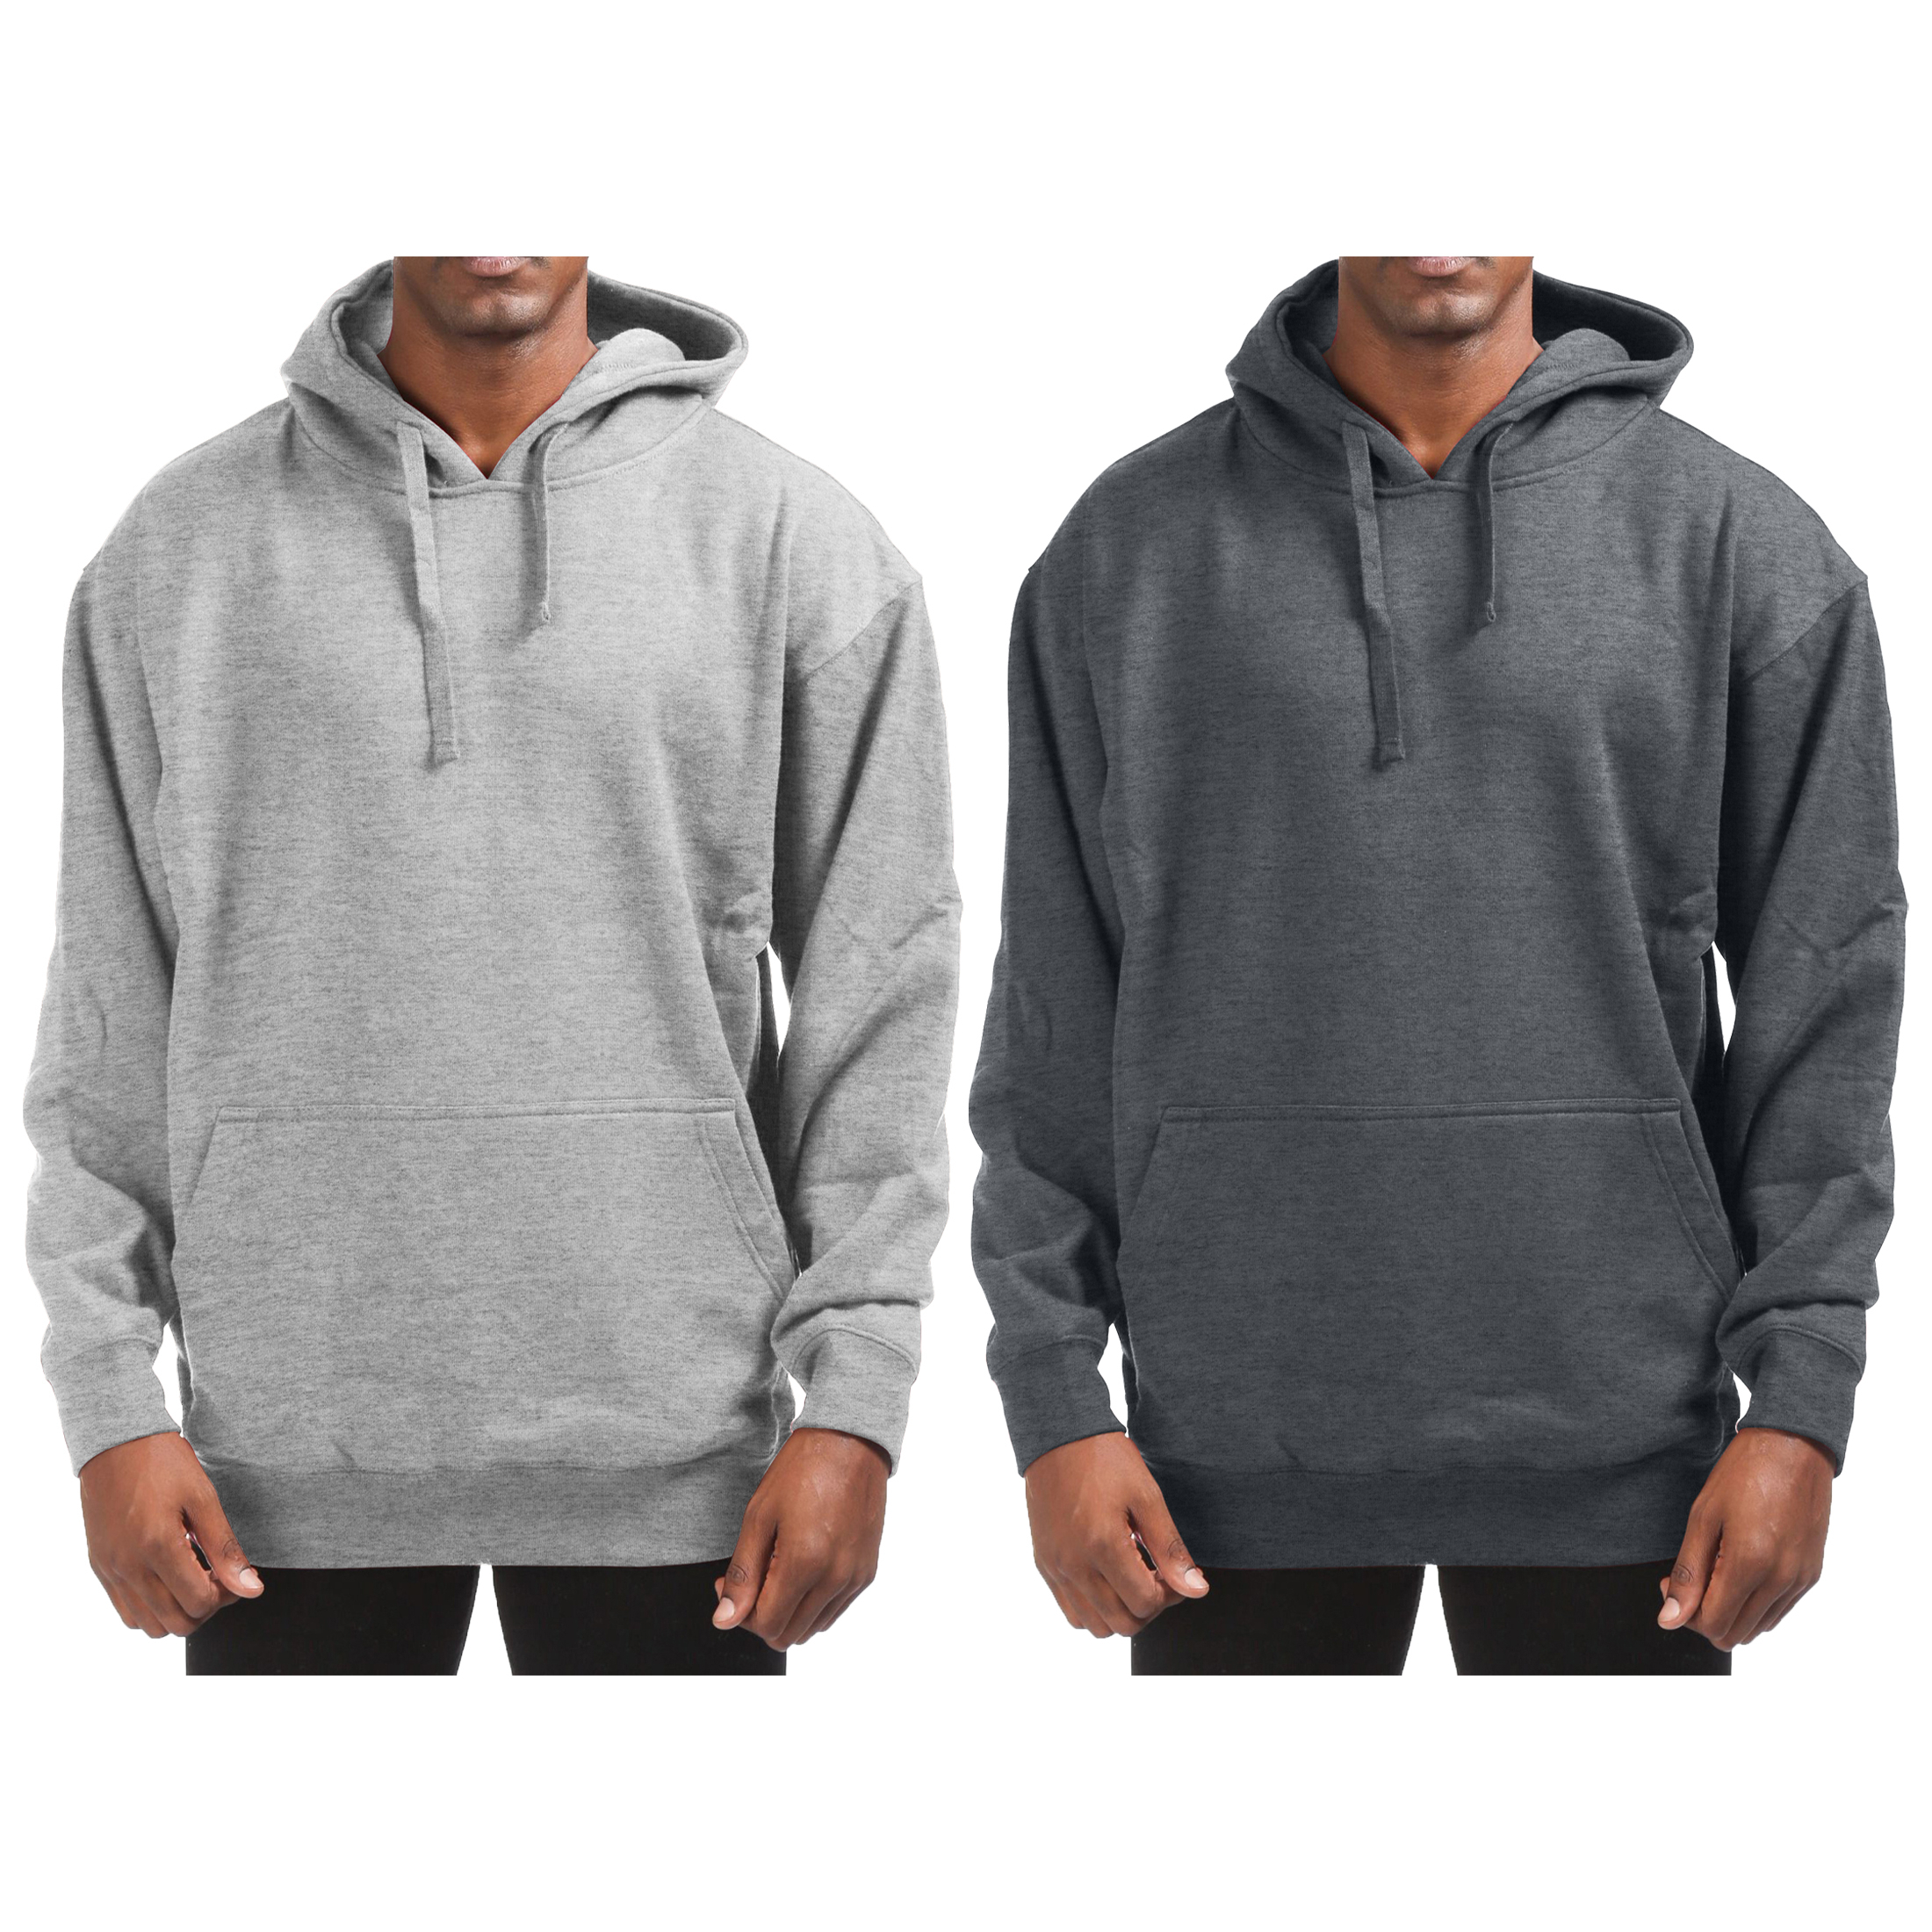 1-PACK Men's Cotton-Blend Fleece Pullover Hoodie With Pocket - XL